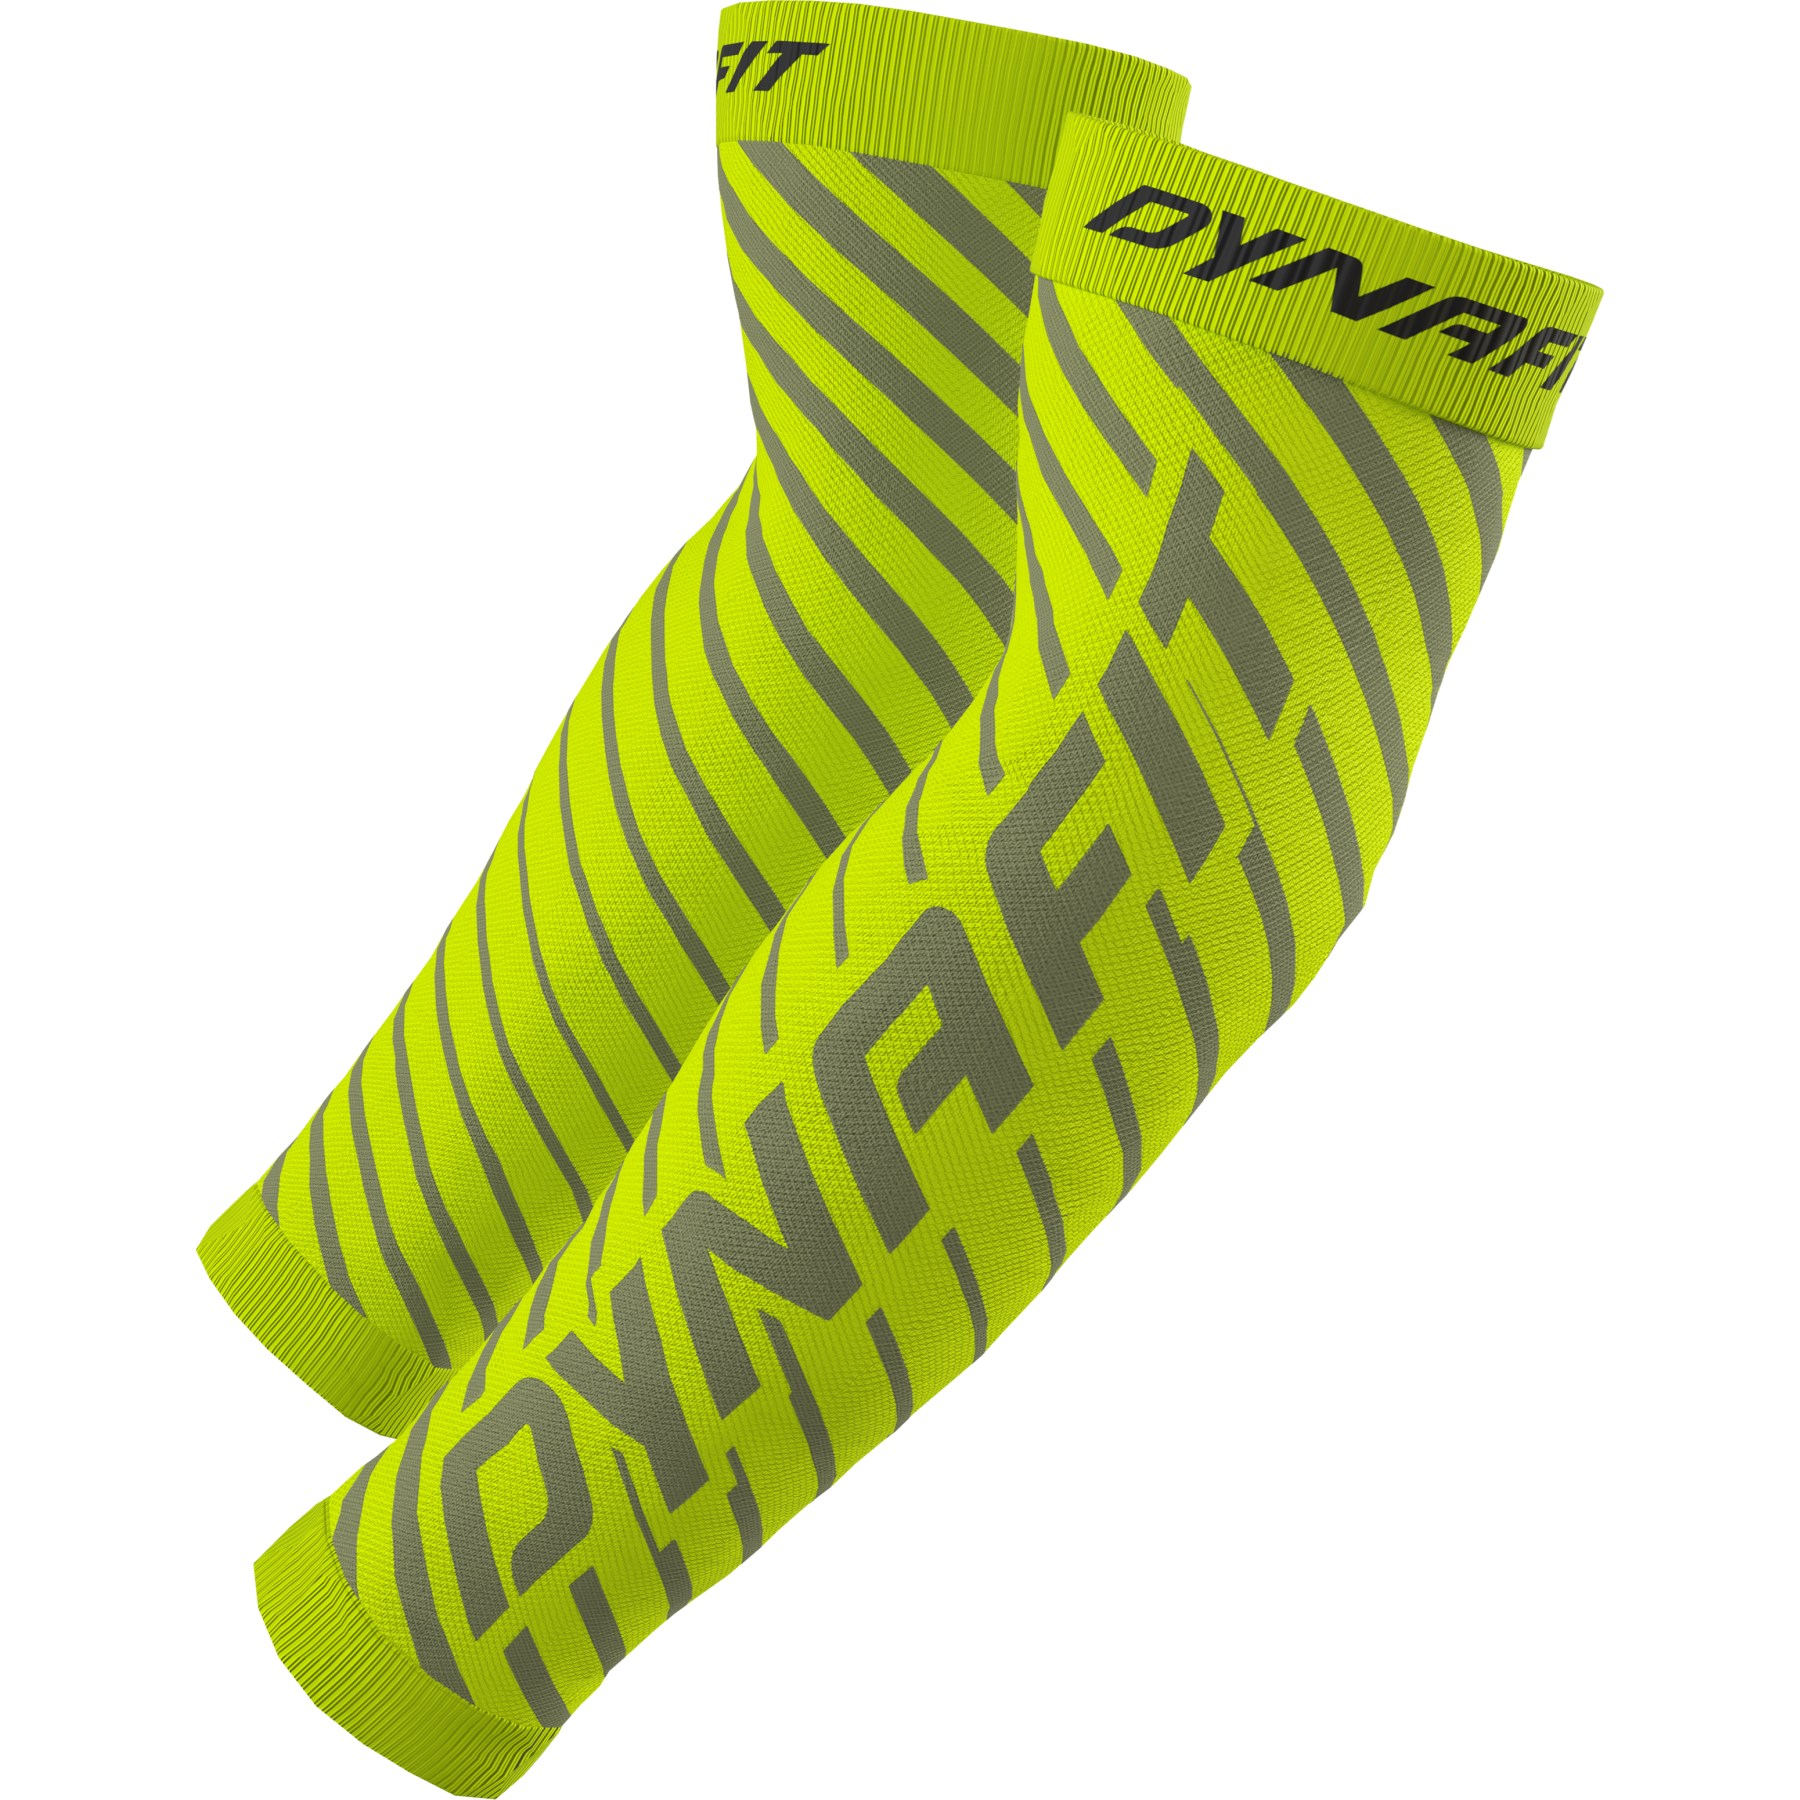 Image of Dynafit Performance Arm Guards - Neon Yellow